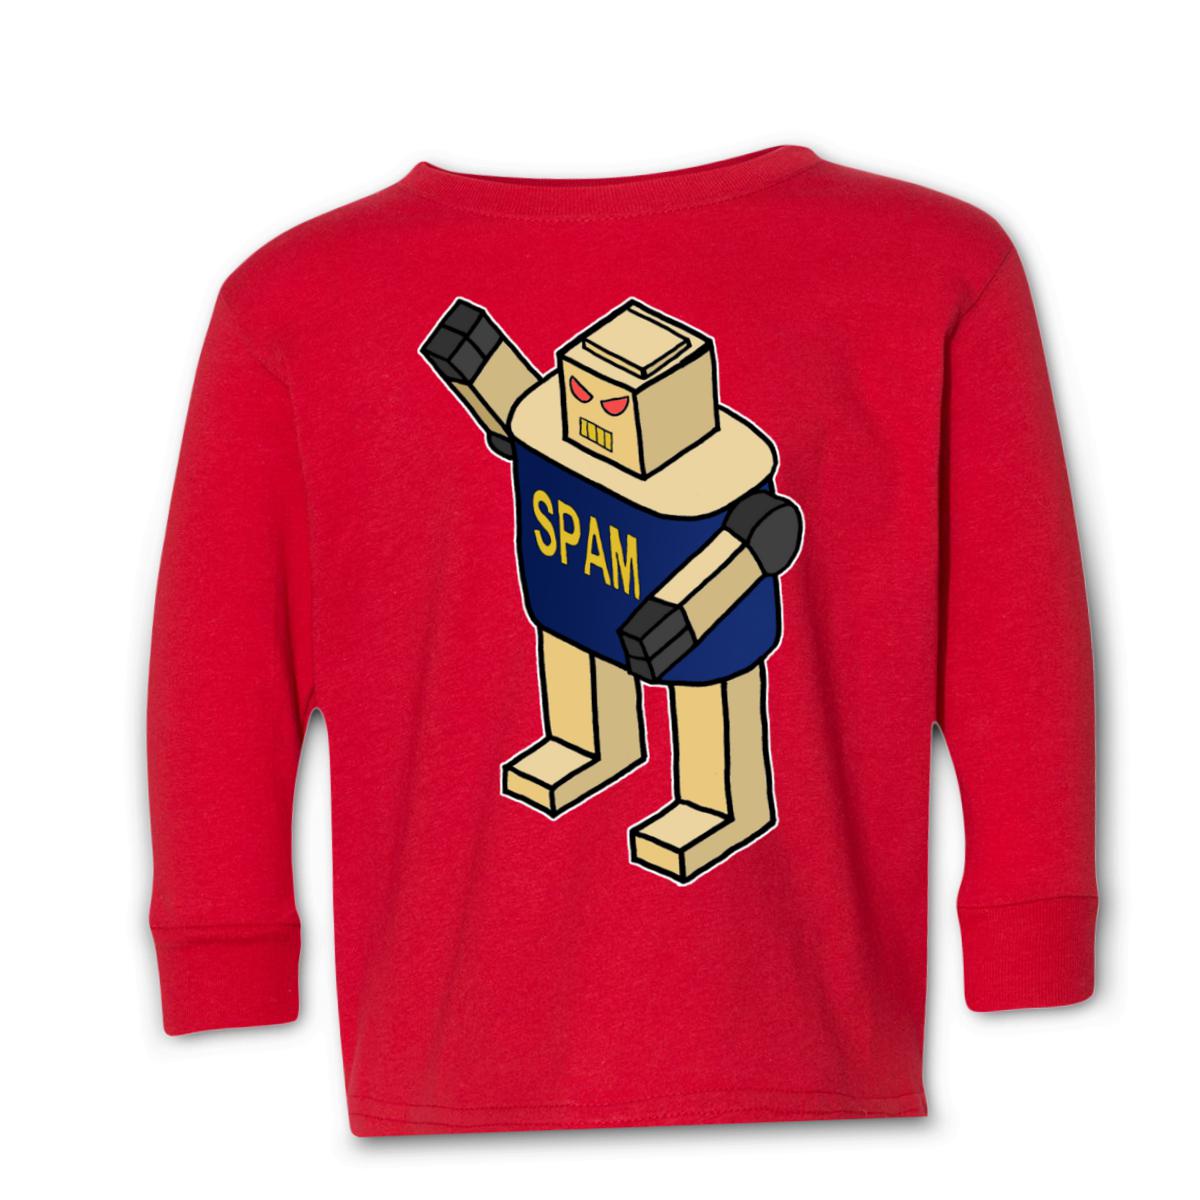 Spam Bot Kid's Long Sleeve Tee Large red